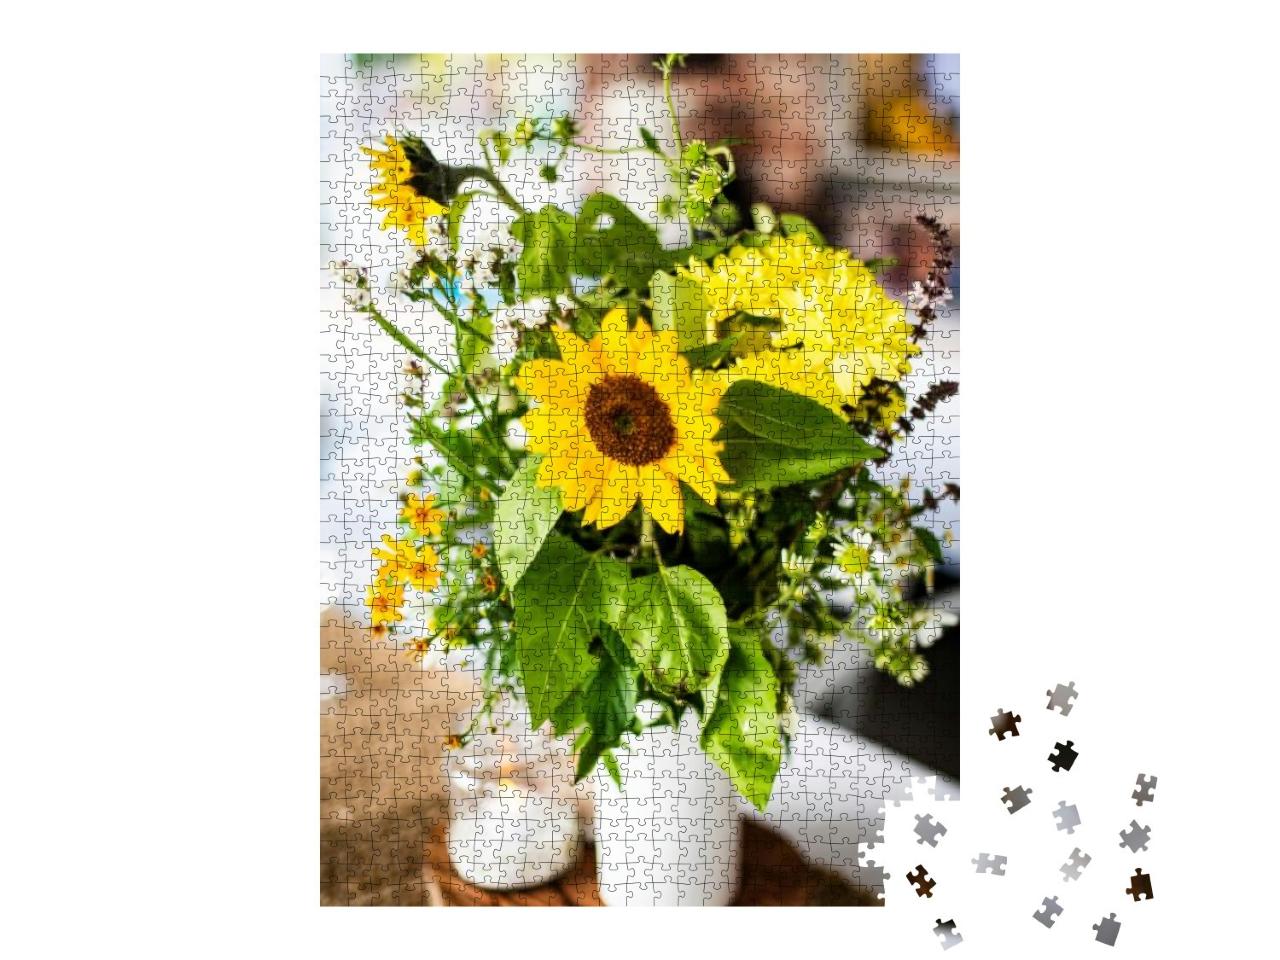 Sunflower Yellow Flower Table Decoration Arrangements, We... Jigsaw Puzzle with 1000 pieces